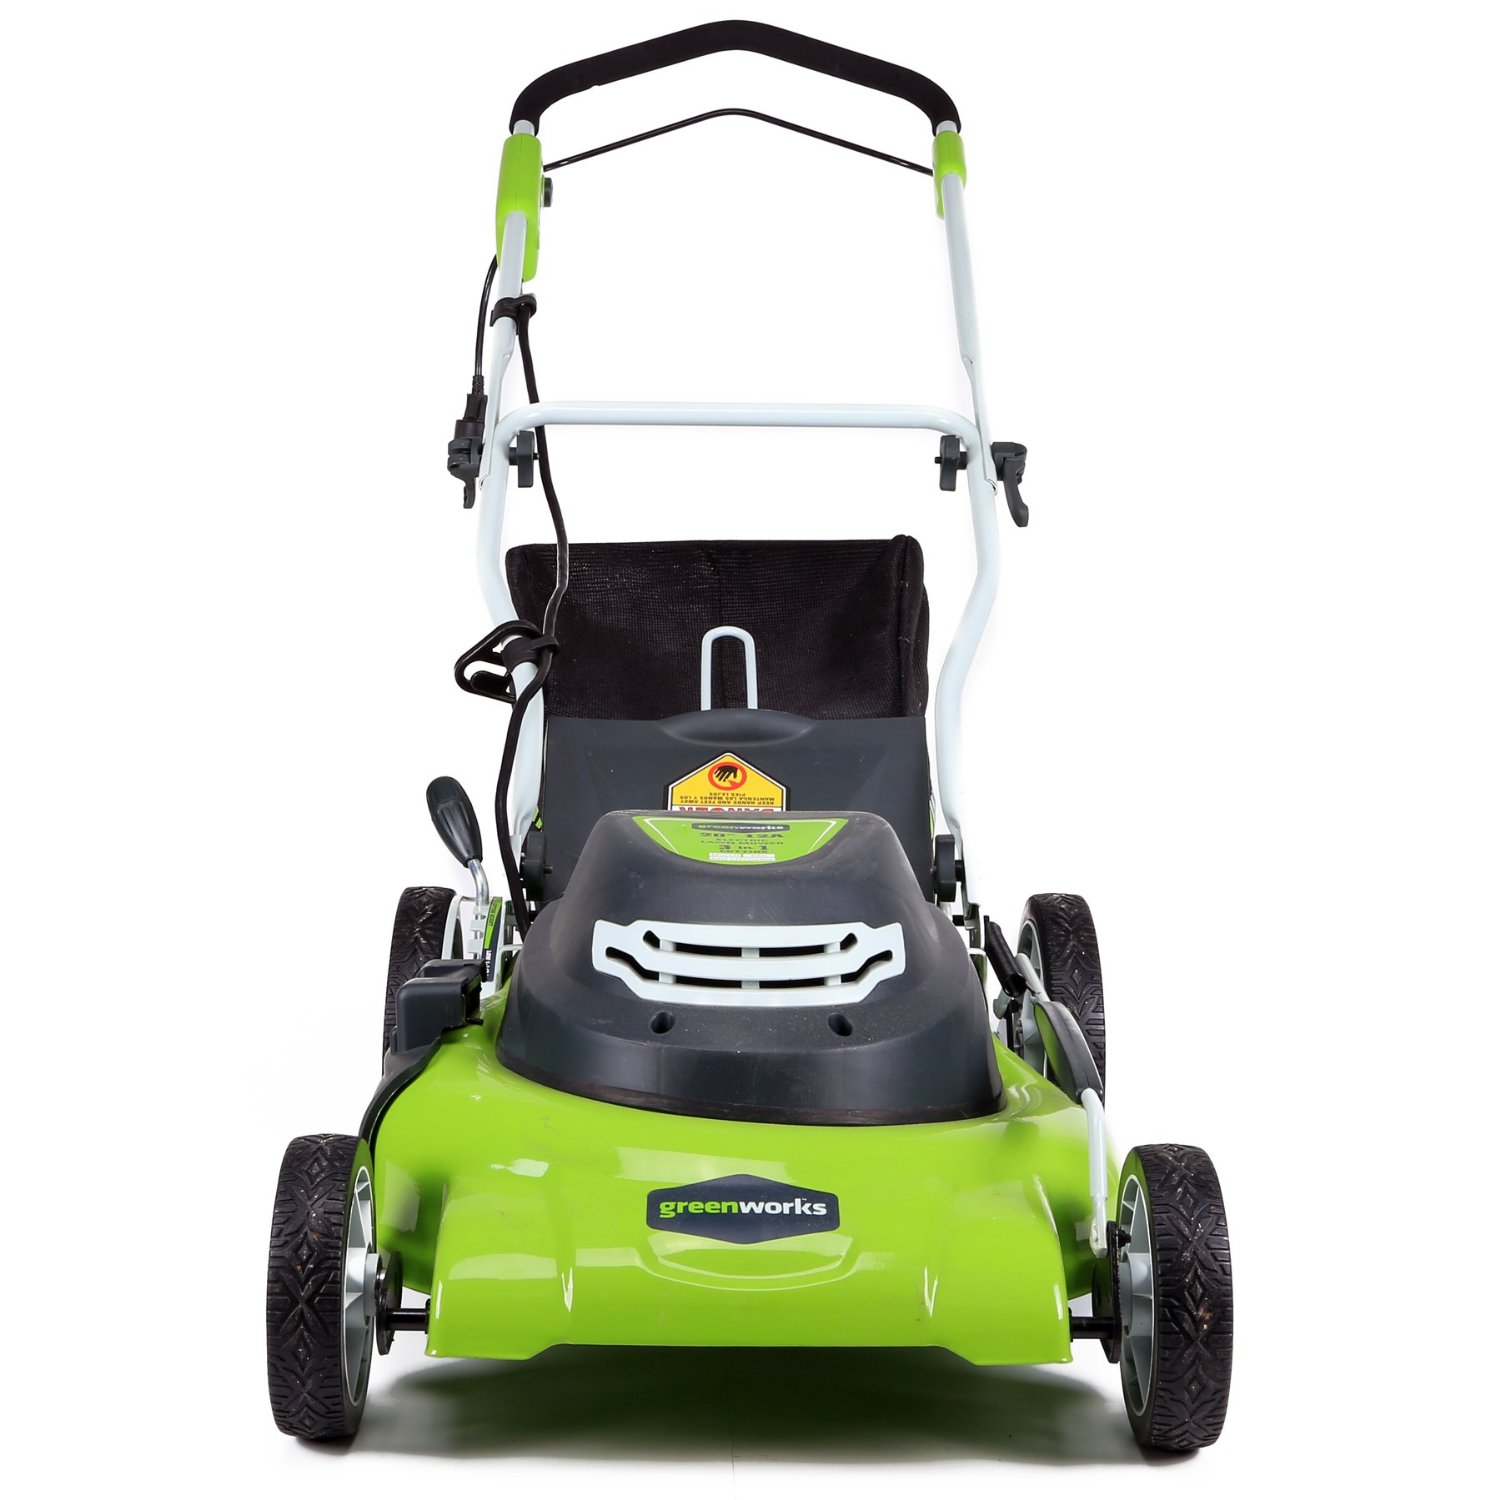 Greenworks 25022 12 Amp 20 3-In-1 Electric Lawn Mower Review ...